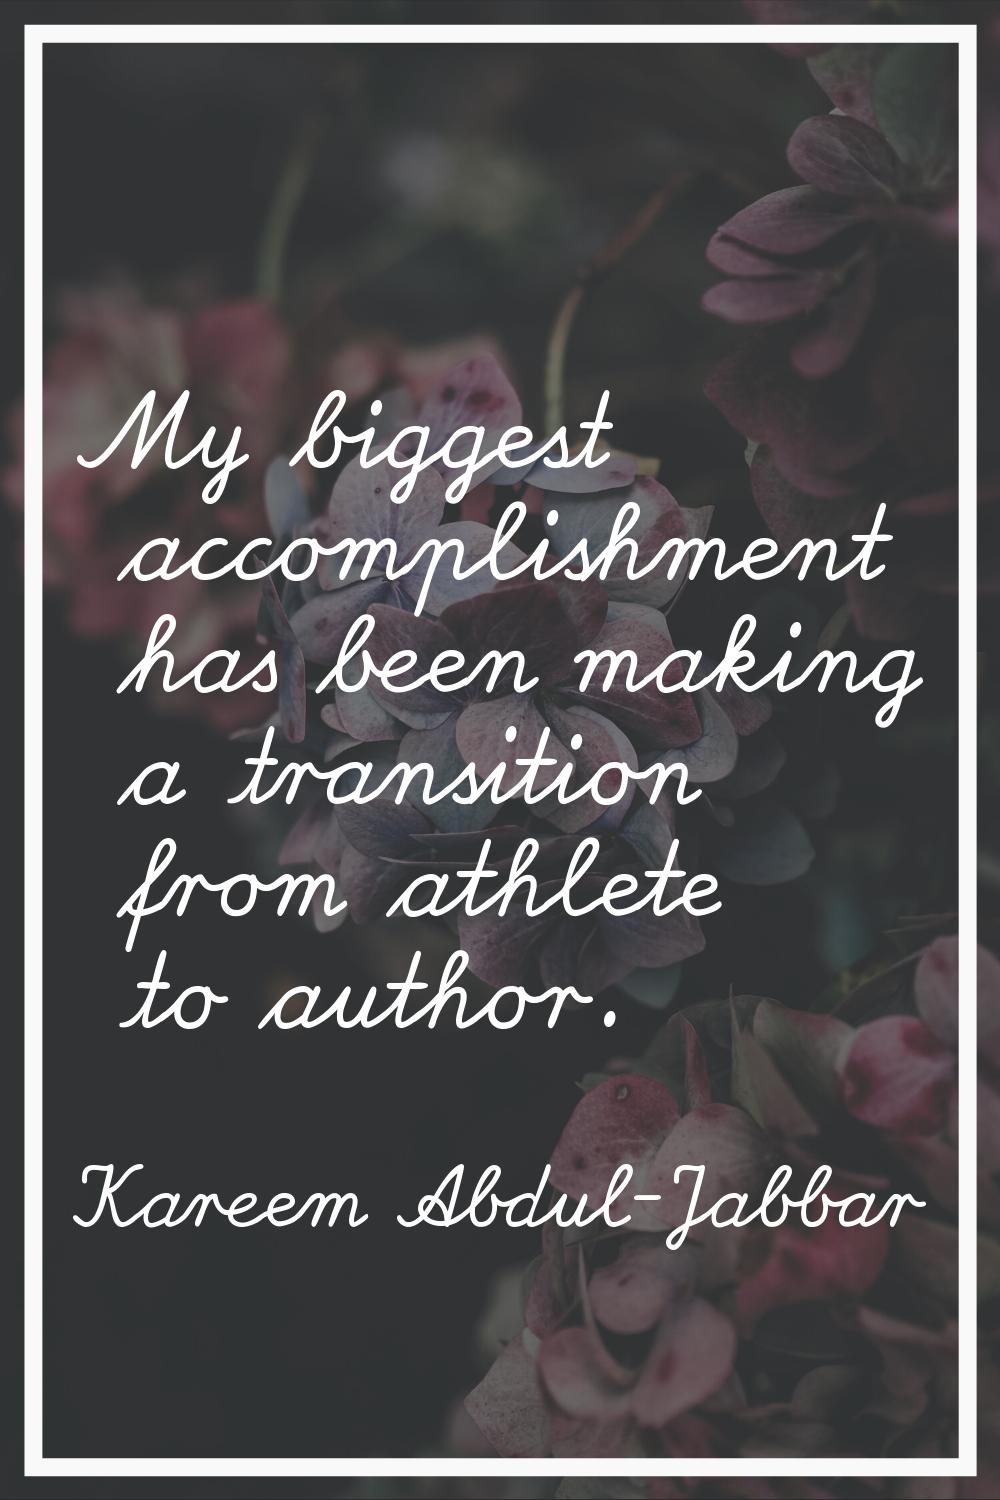 My biggest accomplishment has been making a transition from athlete to author.